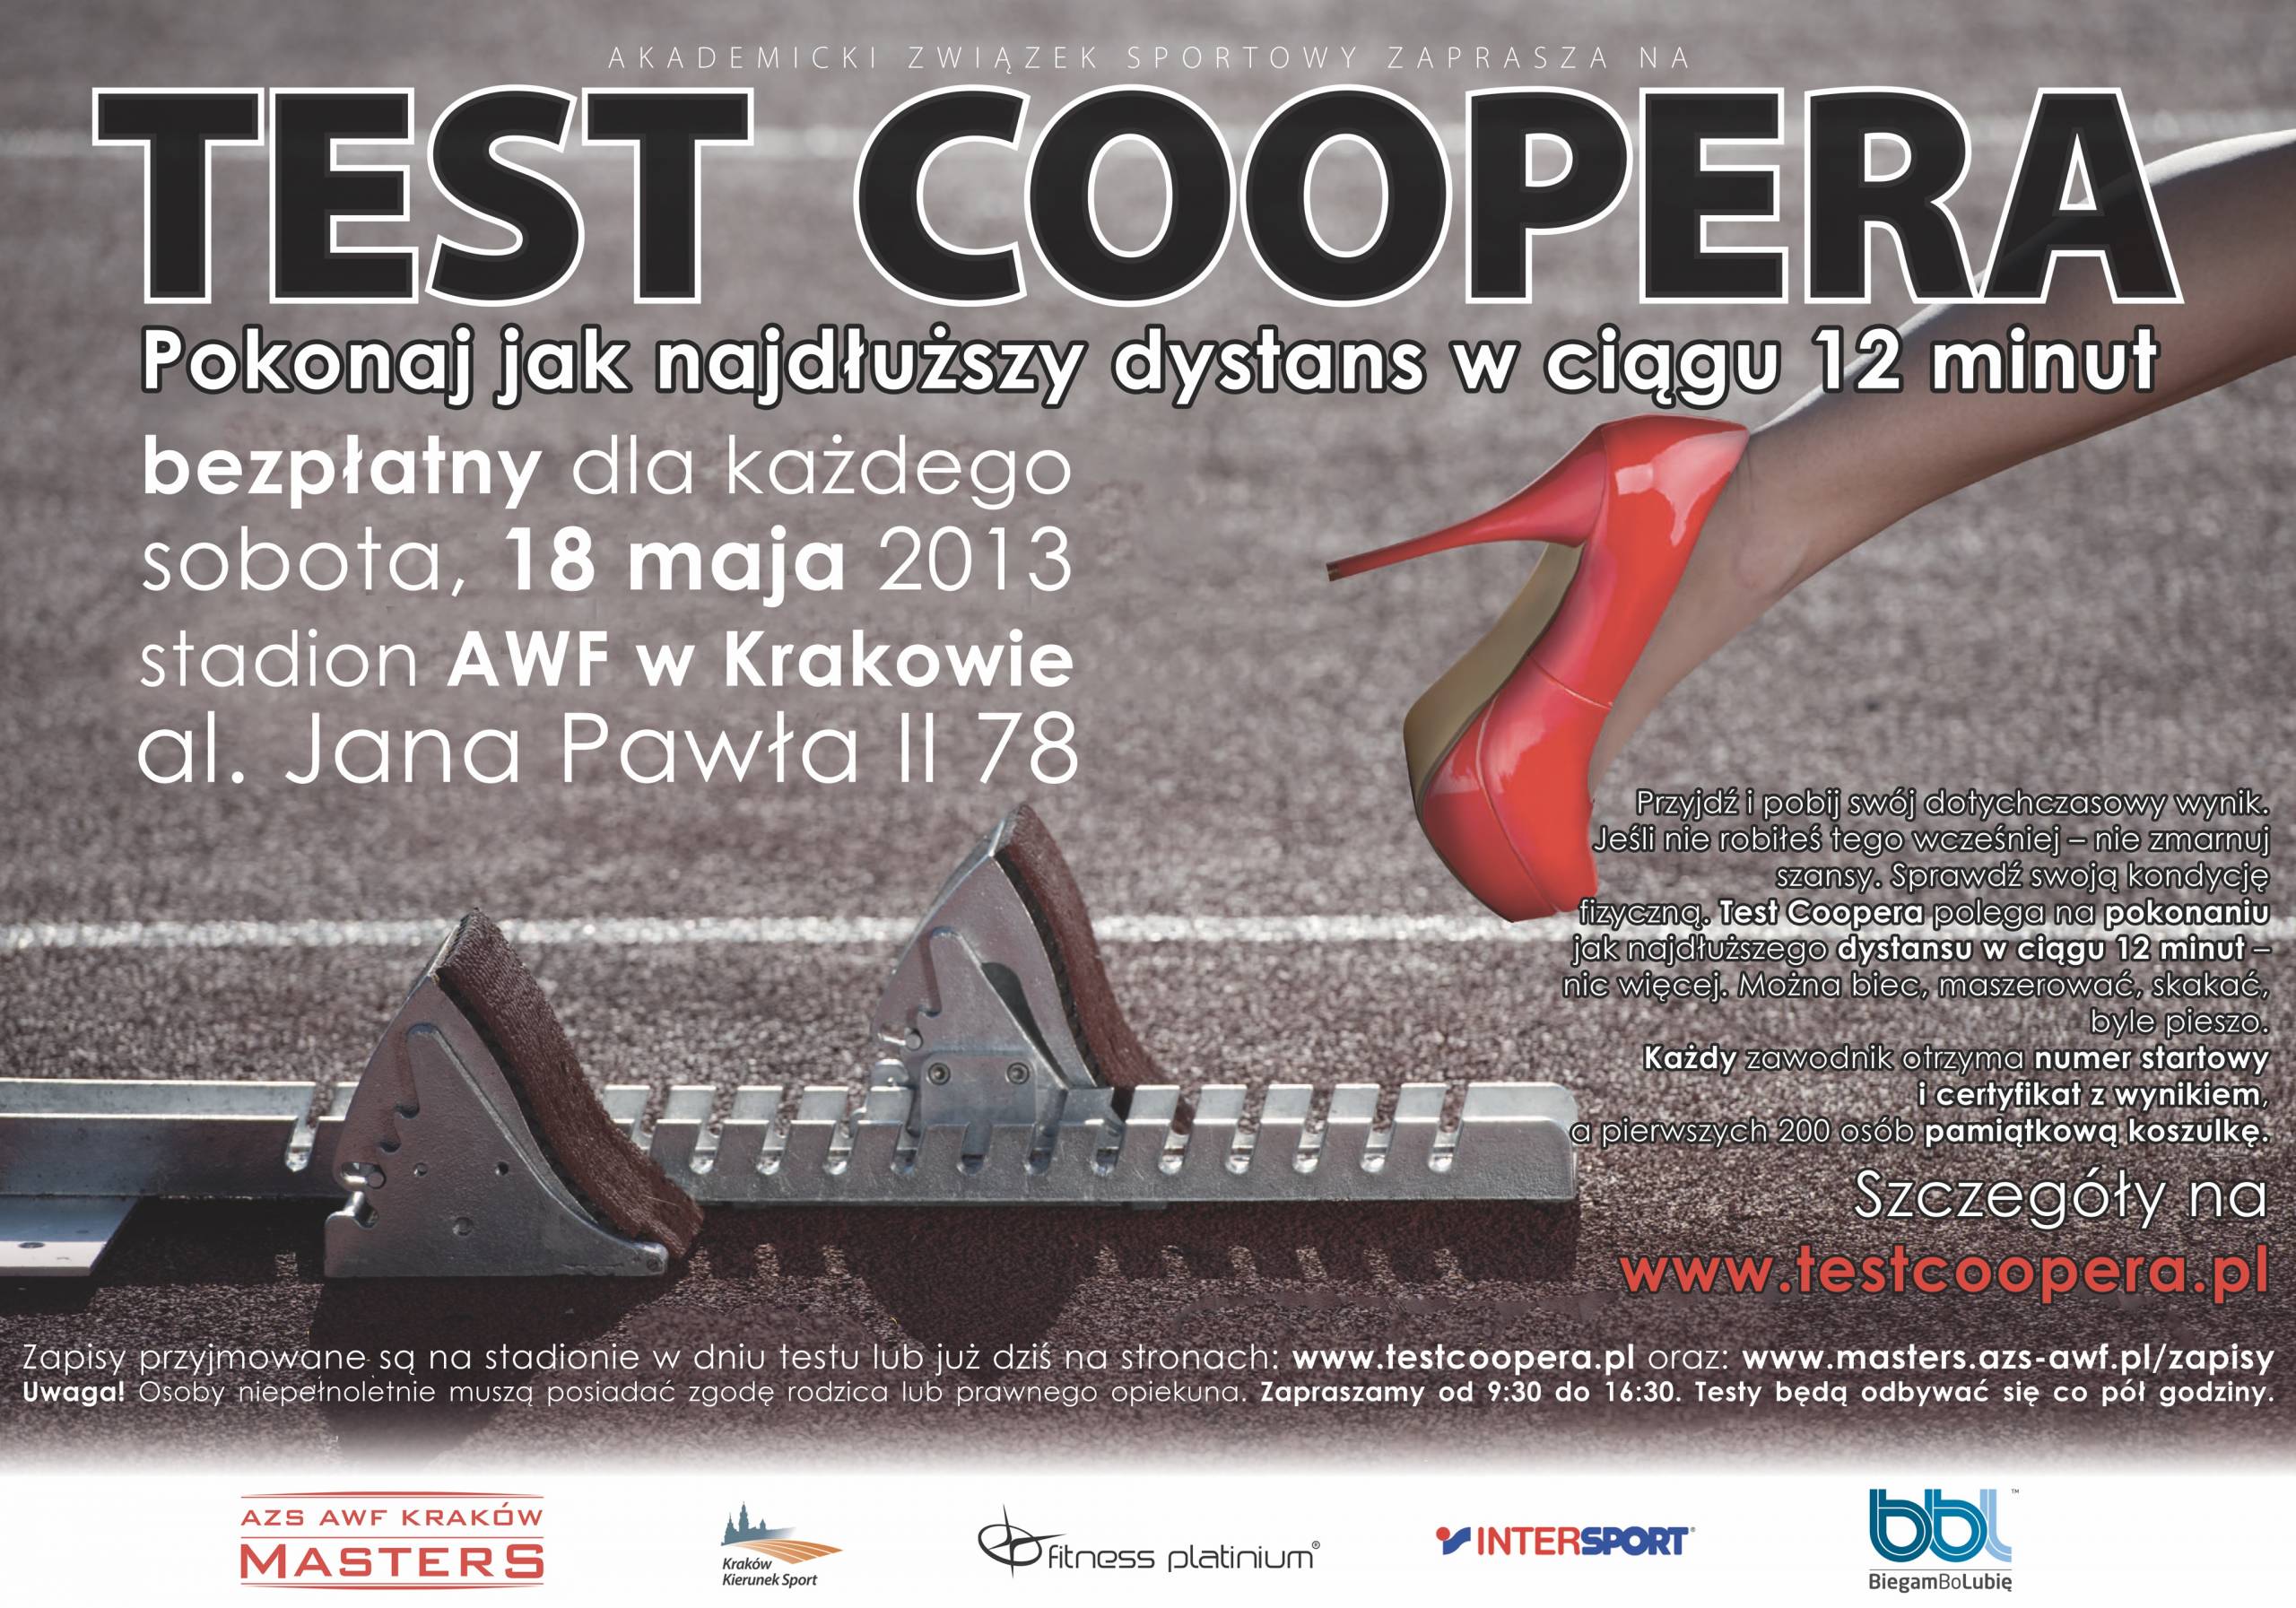 Chapter 5. “Test Coopera”